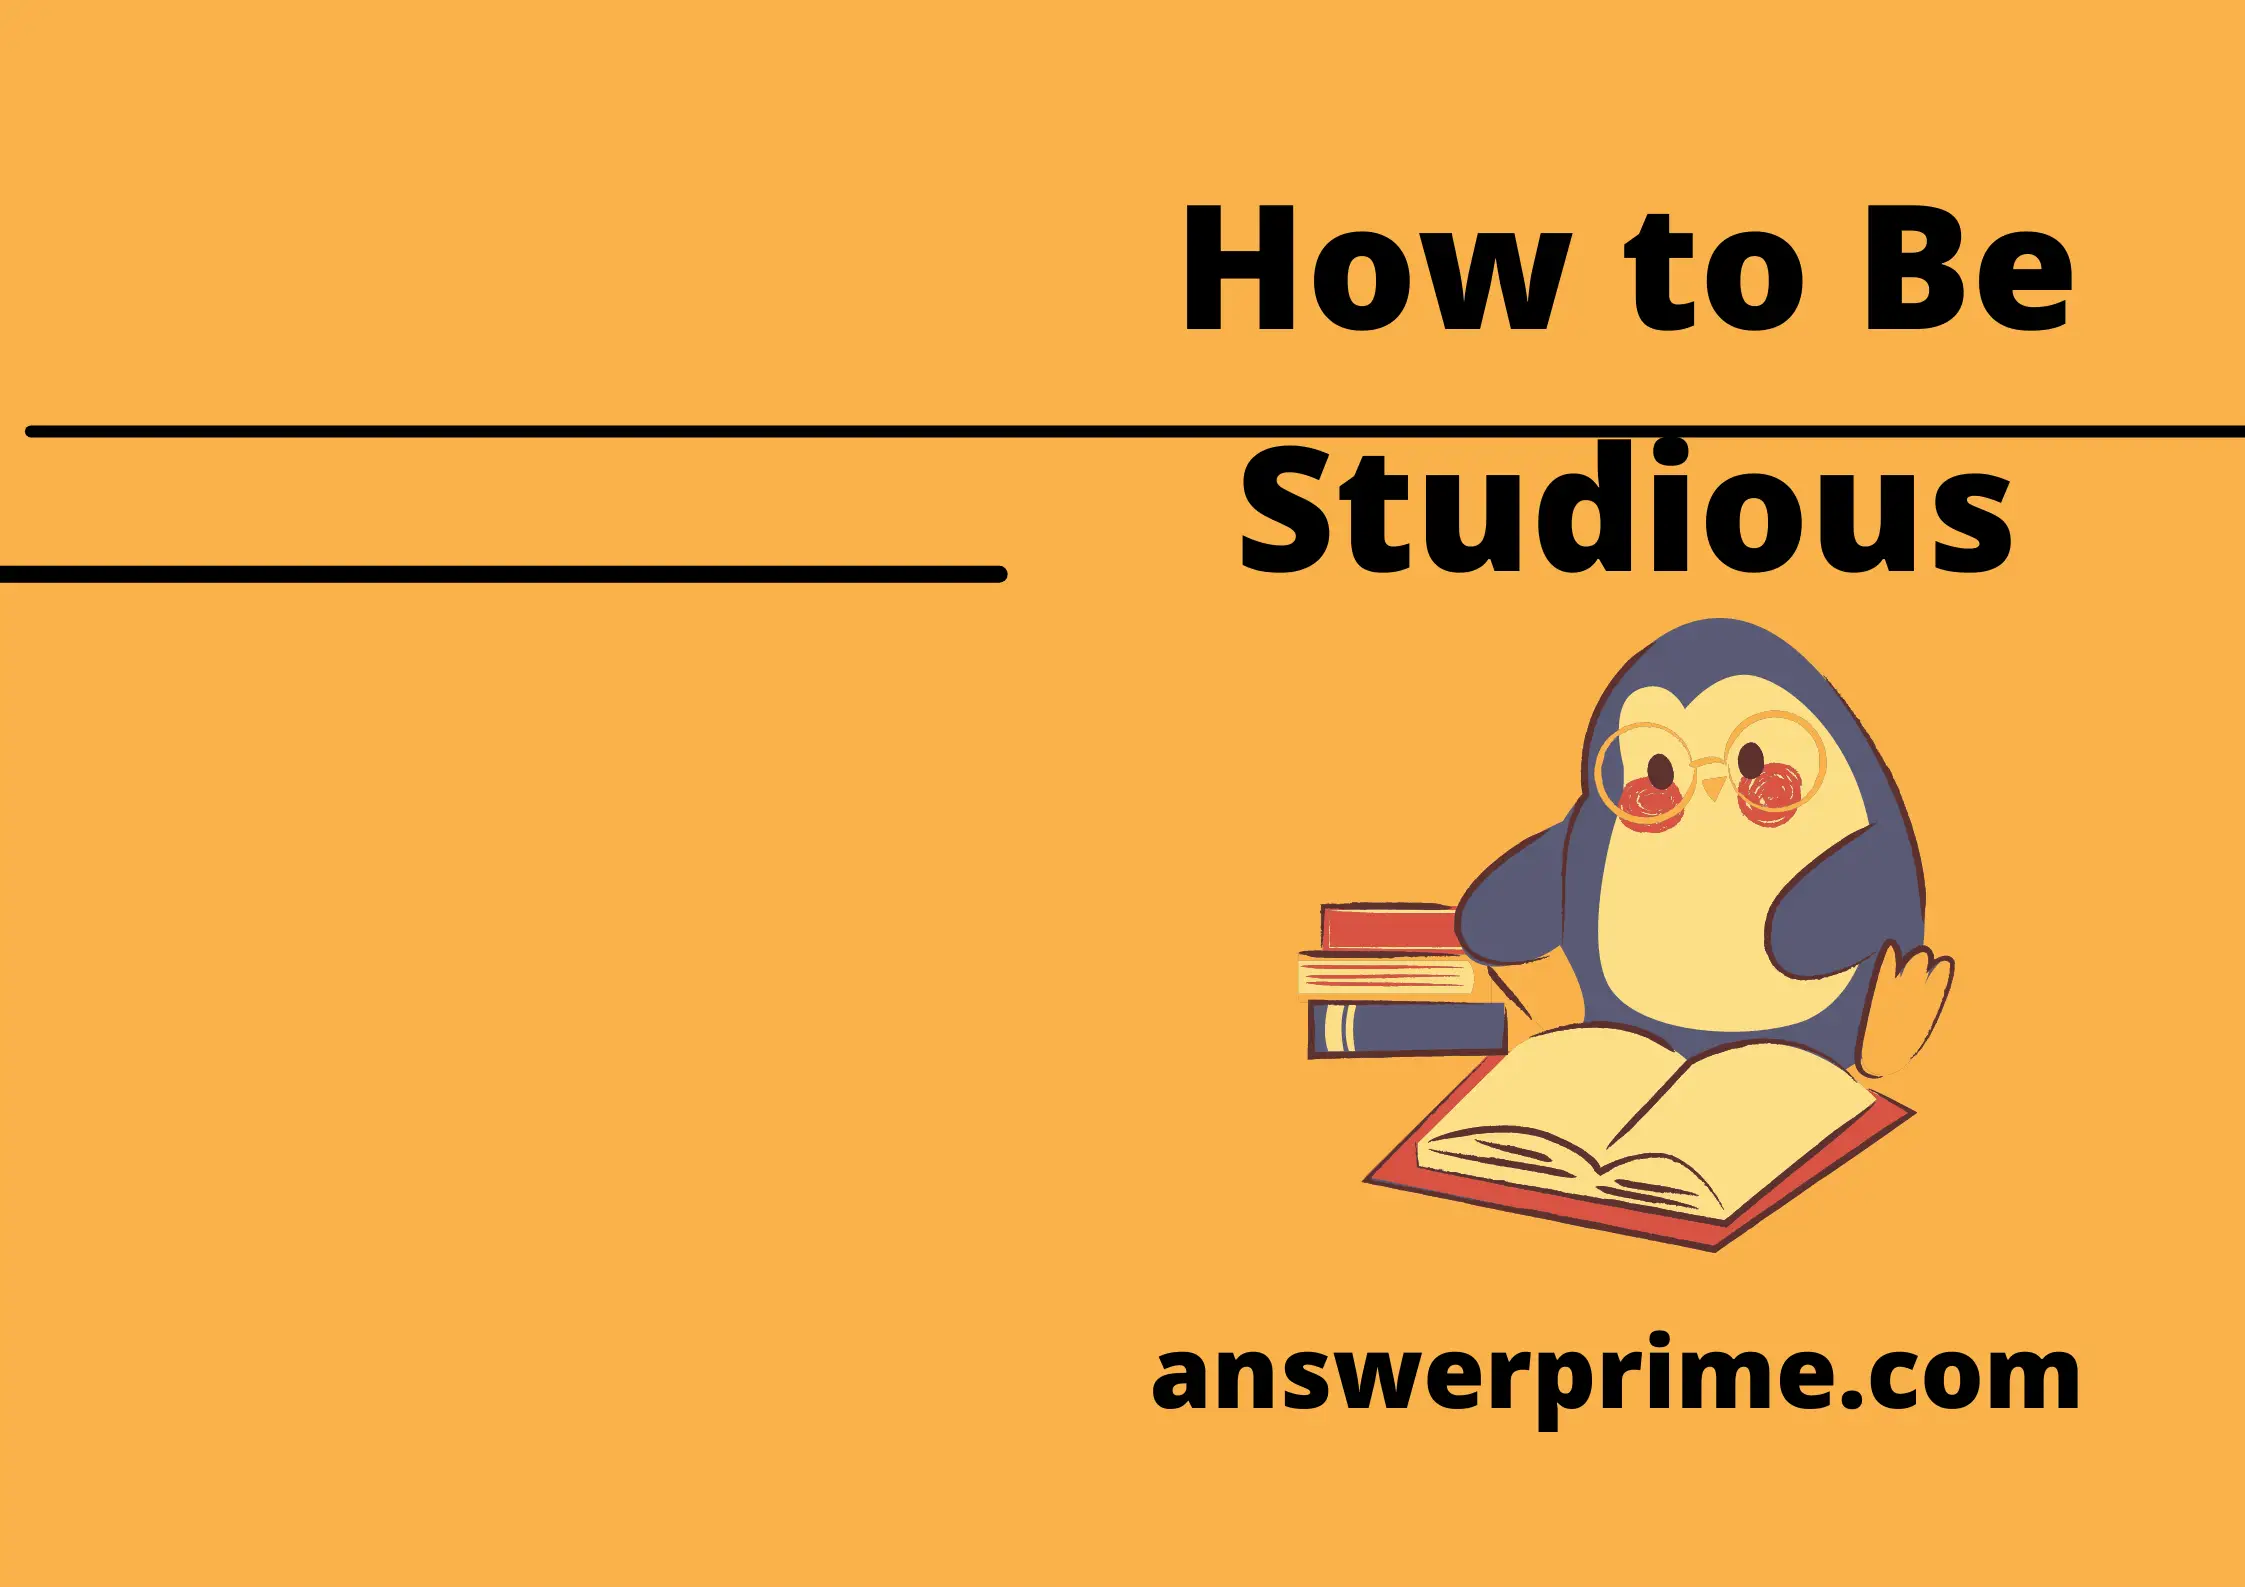 How to Be Studious